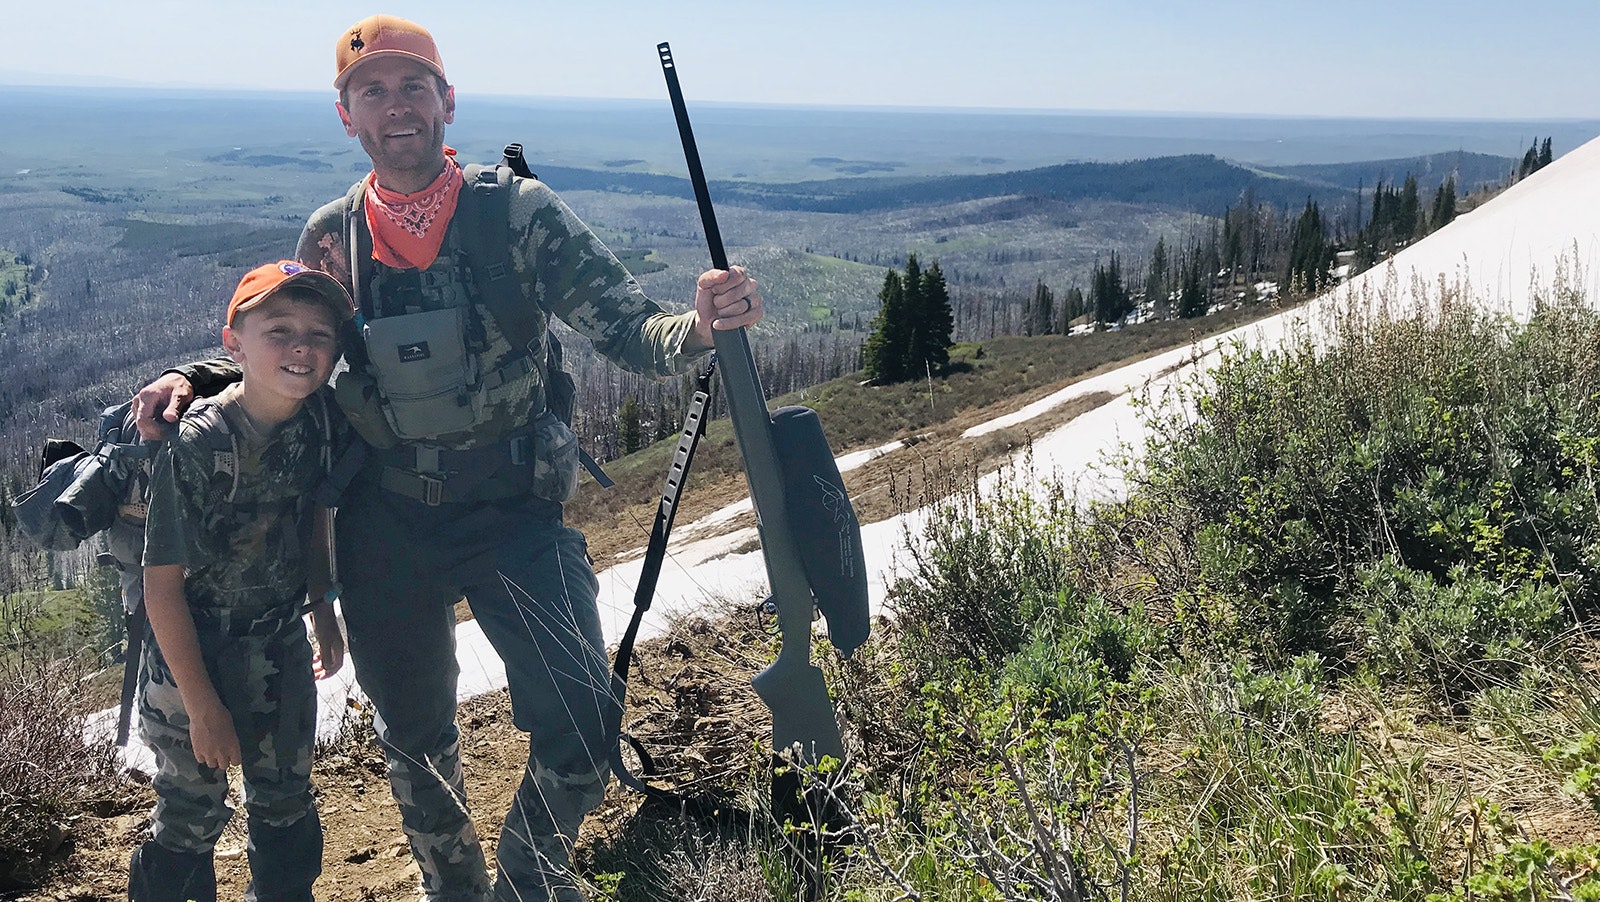 Zachary Key and his son Parker of LaBarge, Wyoming enjoy hunting together. This year, Zachary is asking fellow hunters to forfeit their deer hunts this fall after deer were hit with devastating winterkill. Instead, deer tags can be used as “raffle tickets” for prize drawings.